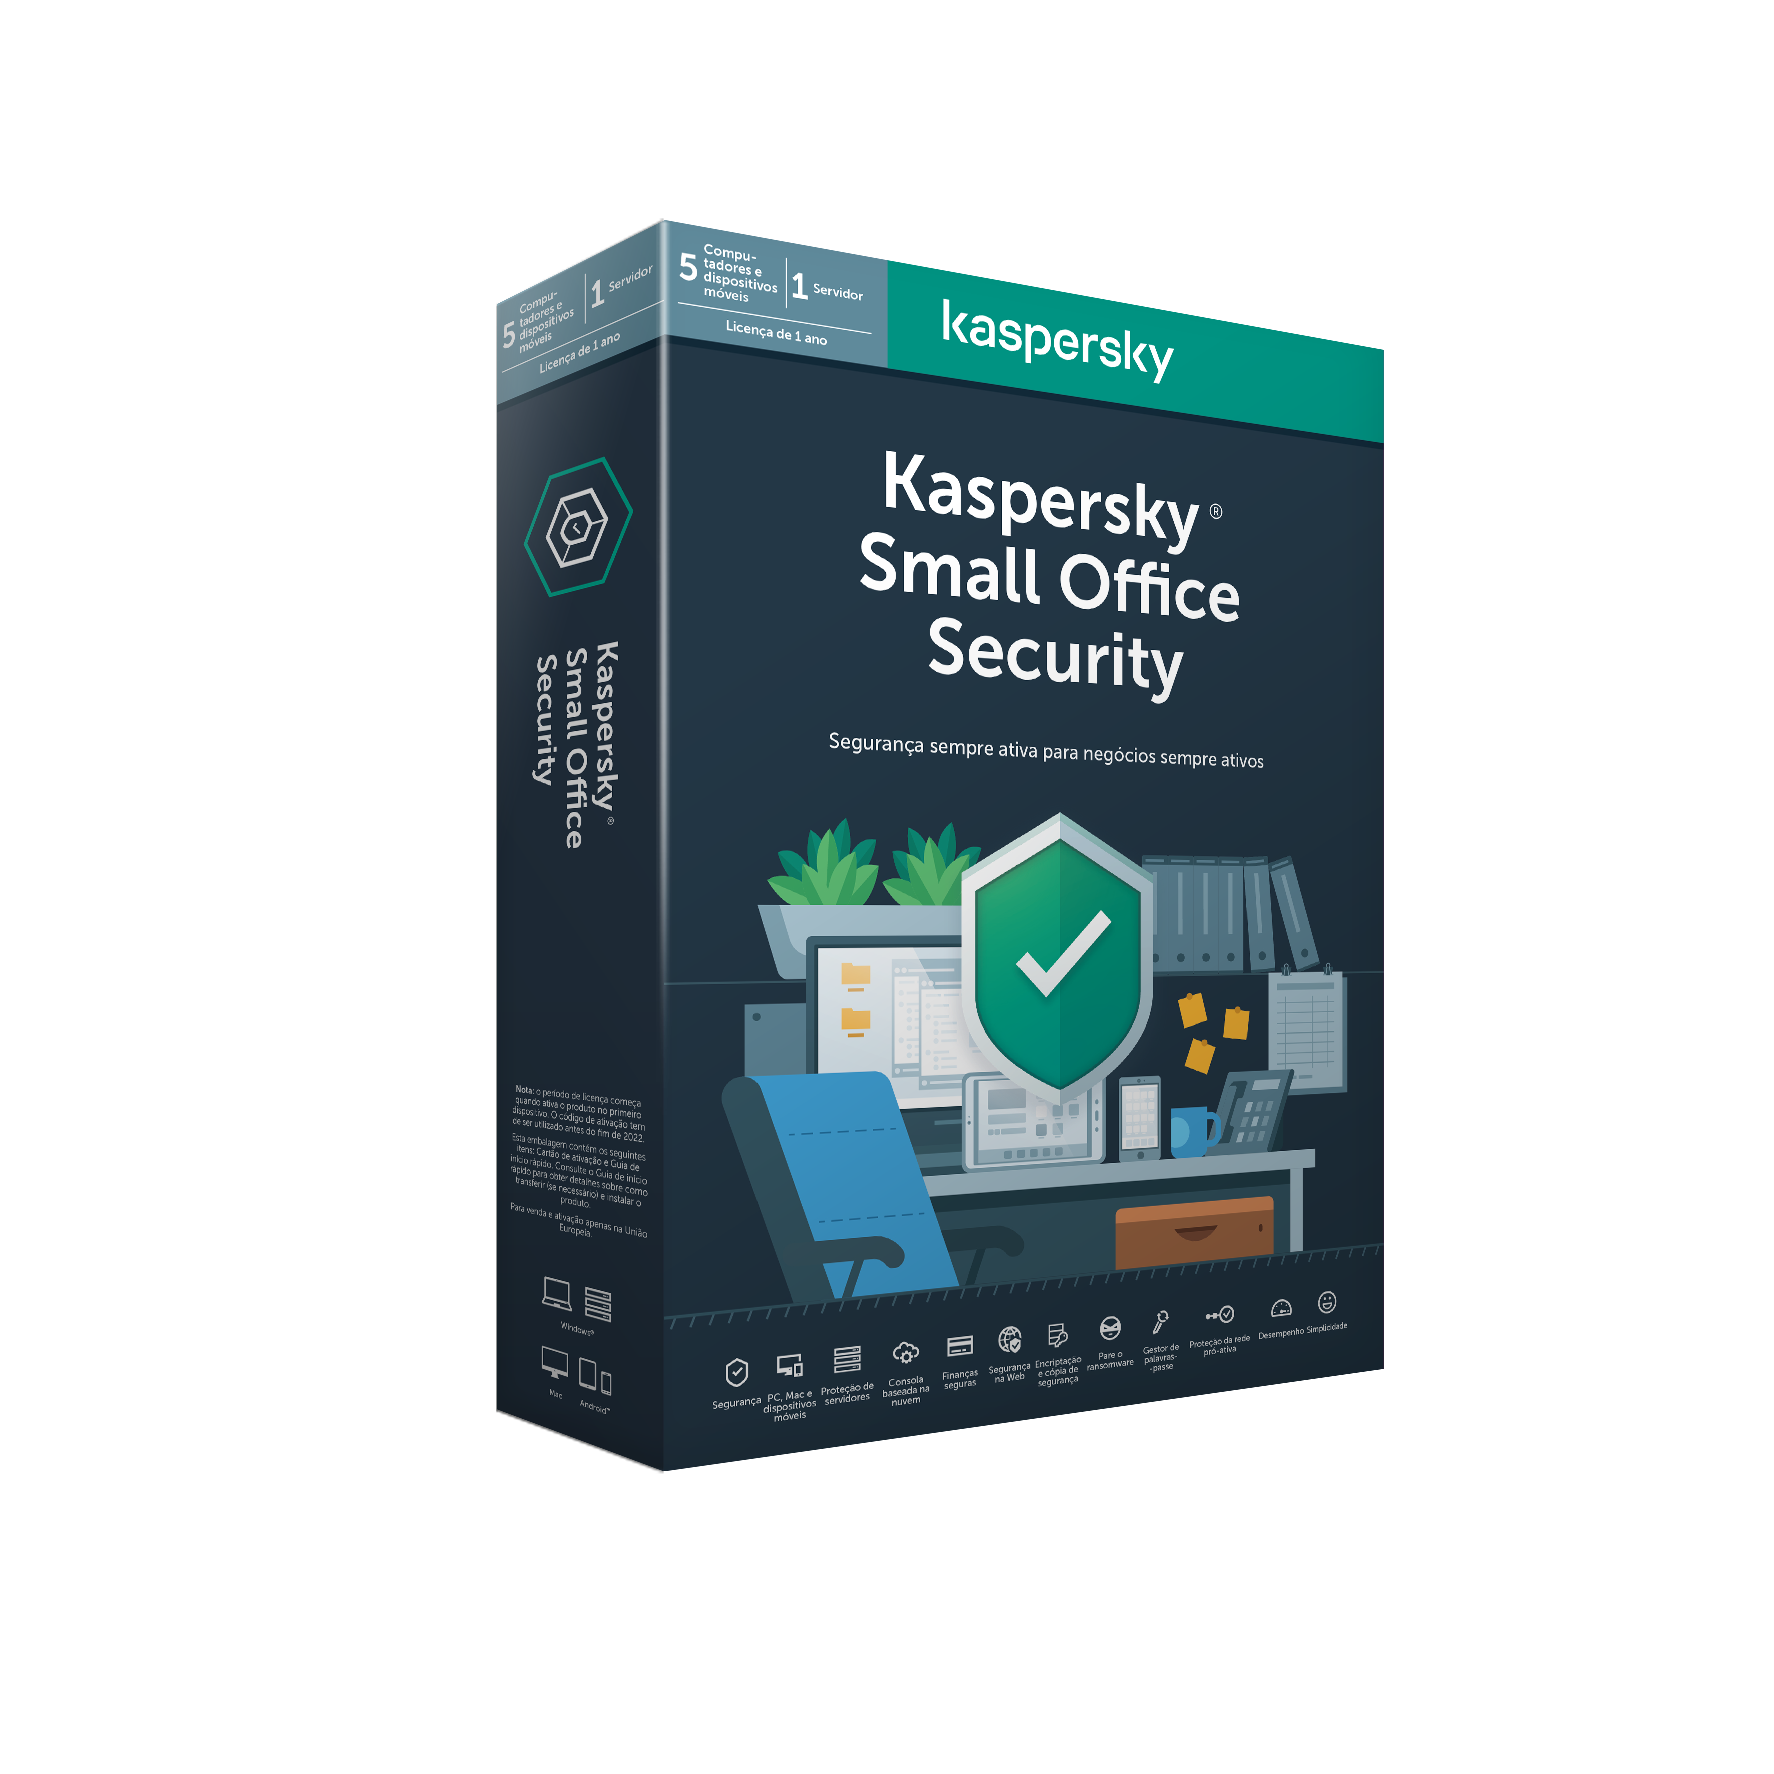 Software Kaspersky Small Office Security 7 5PCs + 1 File Server BOX